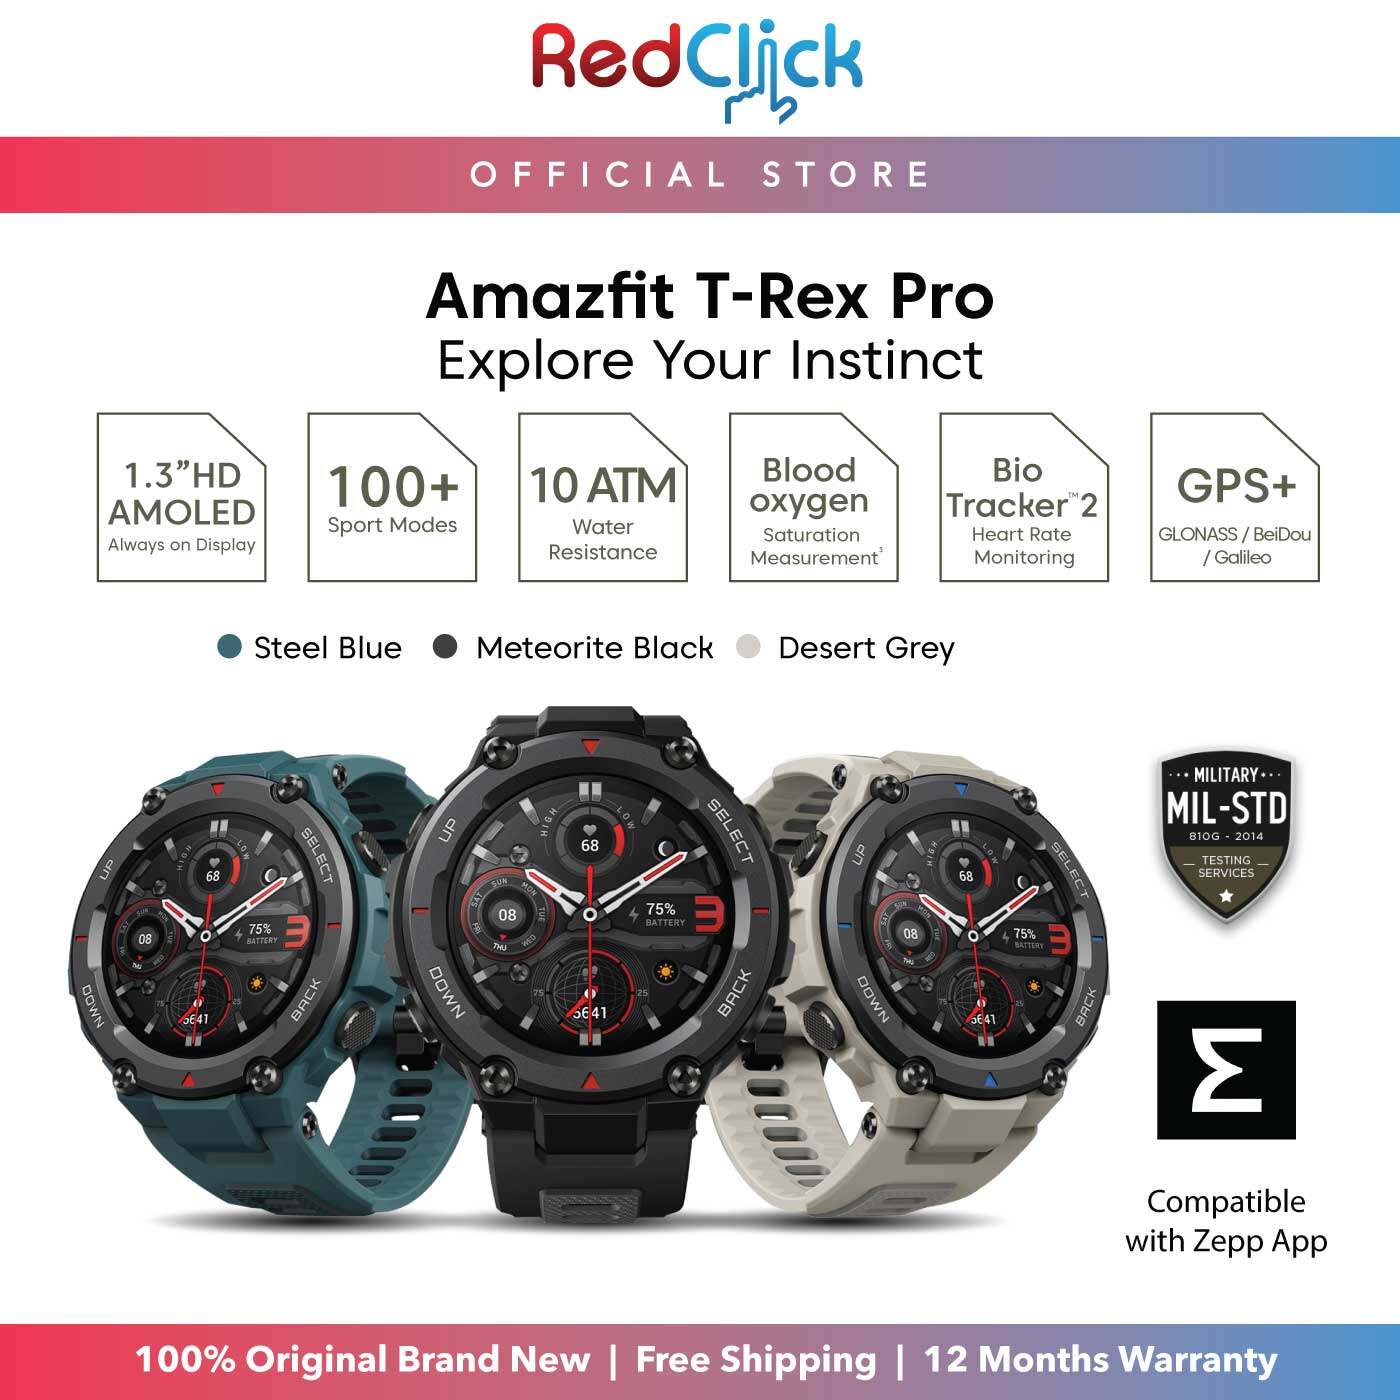 (Official Amazfit) Amazfit T-Rex Pro 1.3" HD AMOLED Display 15 Military-grade Toughness 10 ATM Water-resistance Blood-oxygen Saturation Measurement Smart Watch + Free Gift